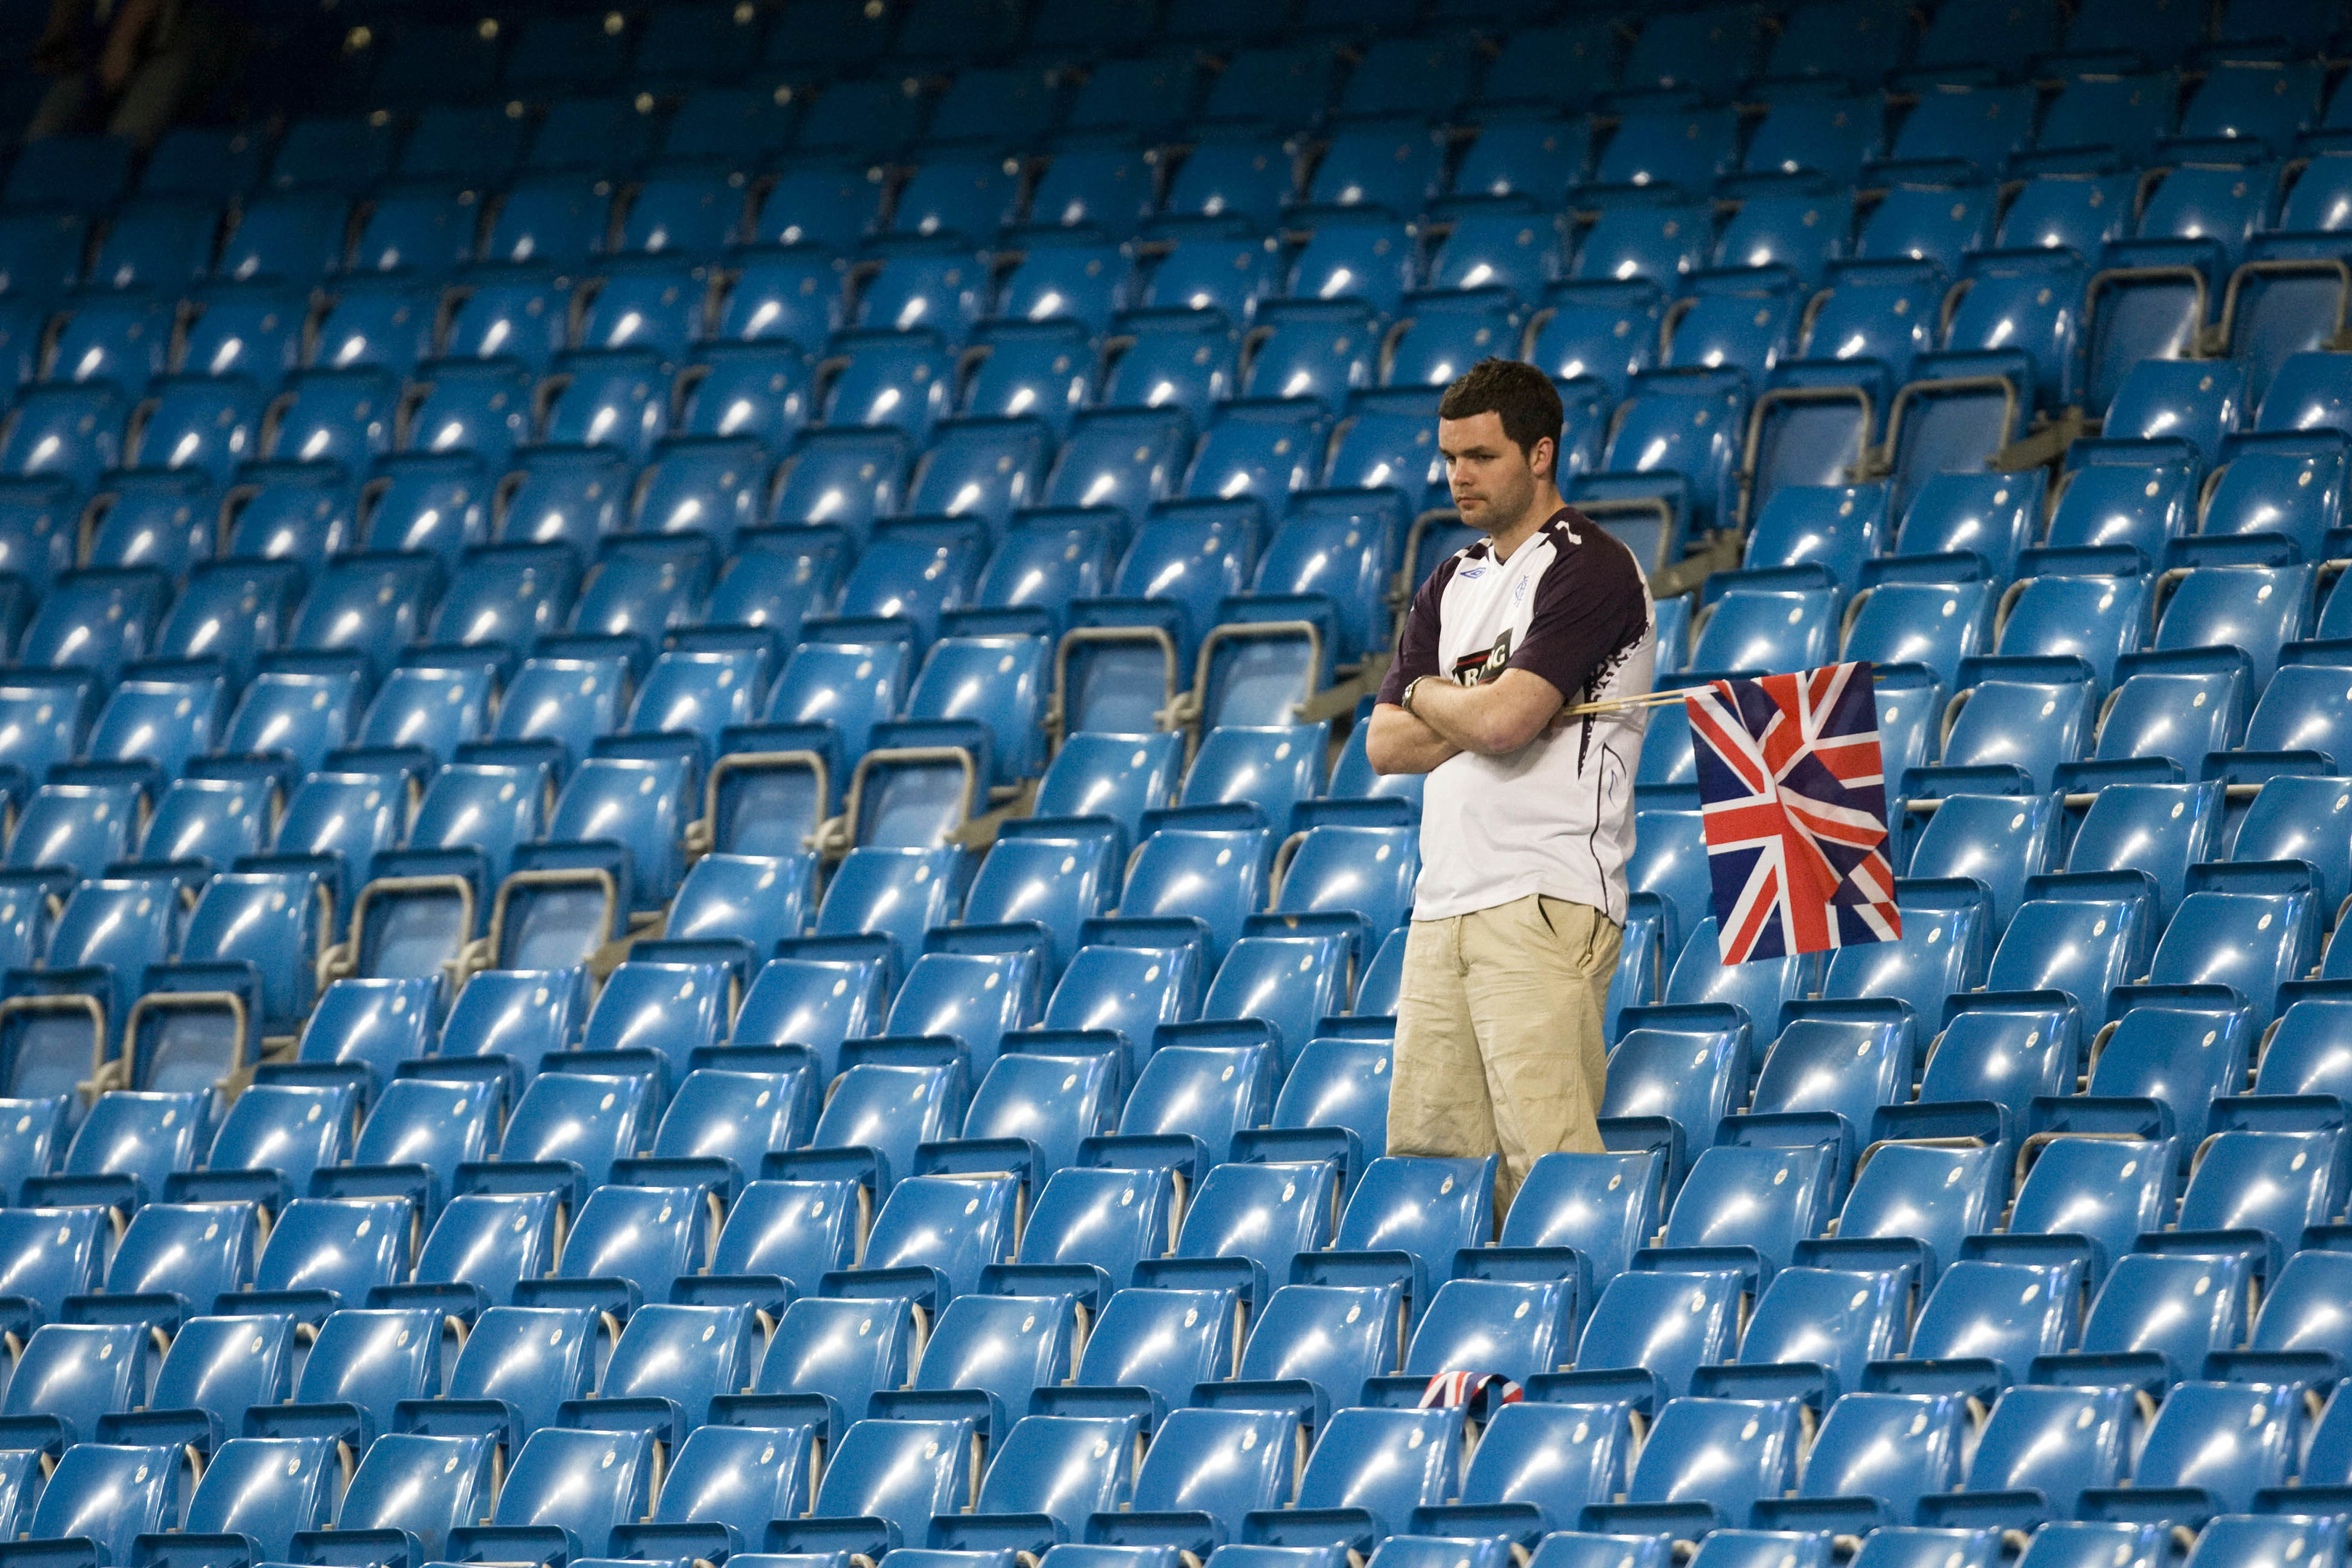 A dejected fan after Rangers' defeat in the 2008 UEFA CUP final against Zenit St Petersburg. It was the last time a Scottish side reached a major European final and Jim wonders if we'll ever see it again.